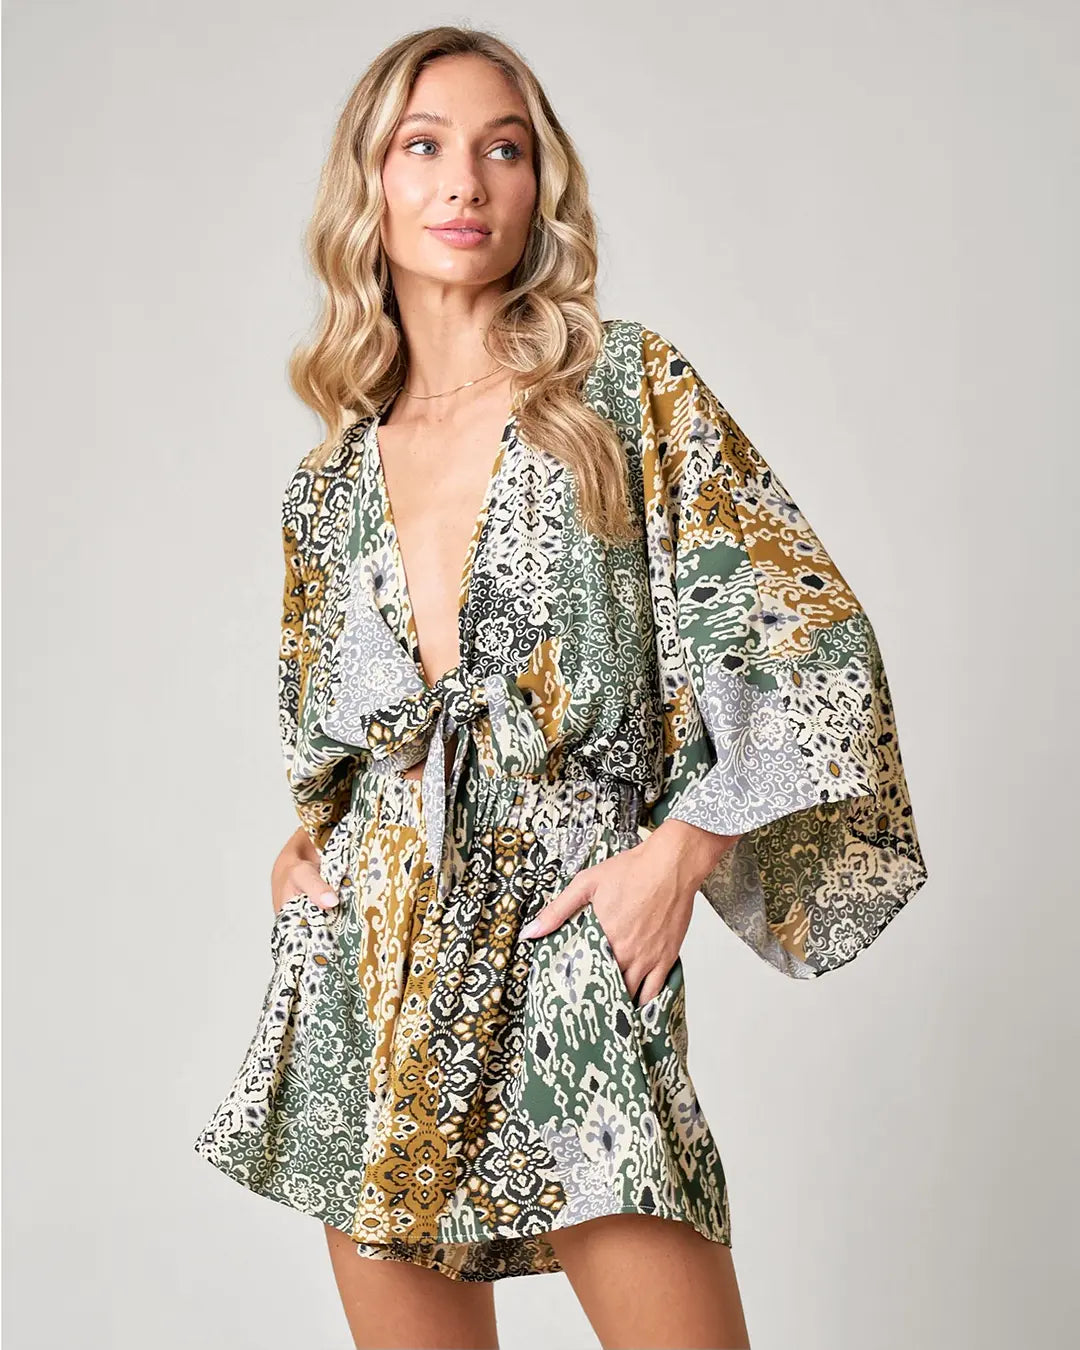 Channel your inner bohemian with our Boho Paisley Print Romper. With batwing sleeves and a tie front detail, this romper is both stylish and comfortable. Complete with side pockets and made from breathable fabrics, you'll feel super flattering and ready to rock those western vibes.